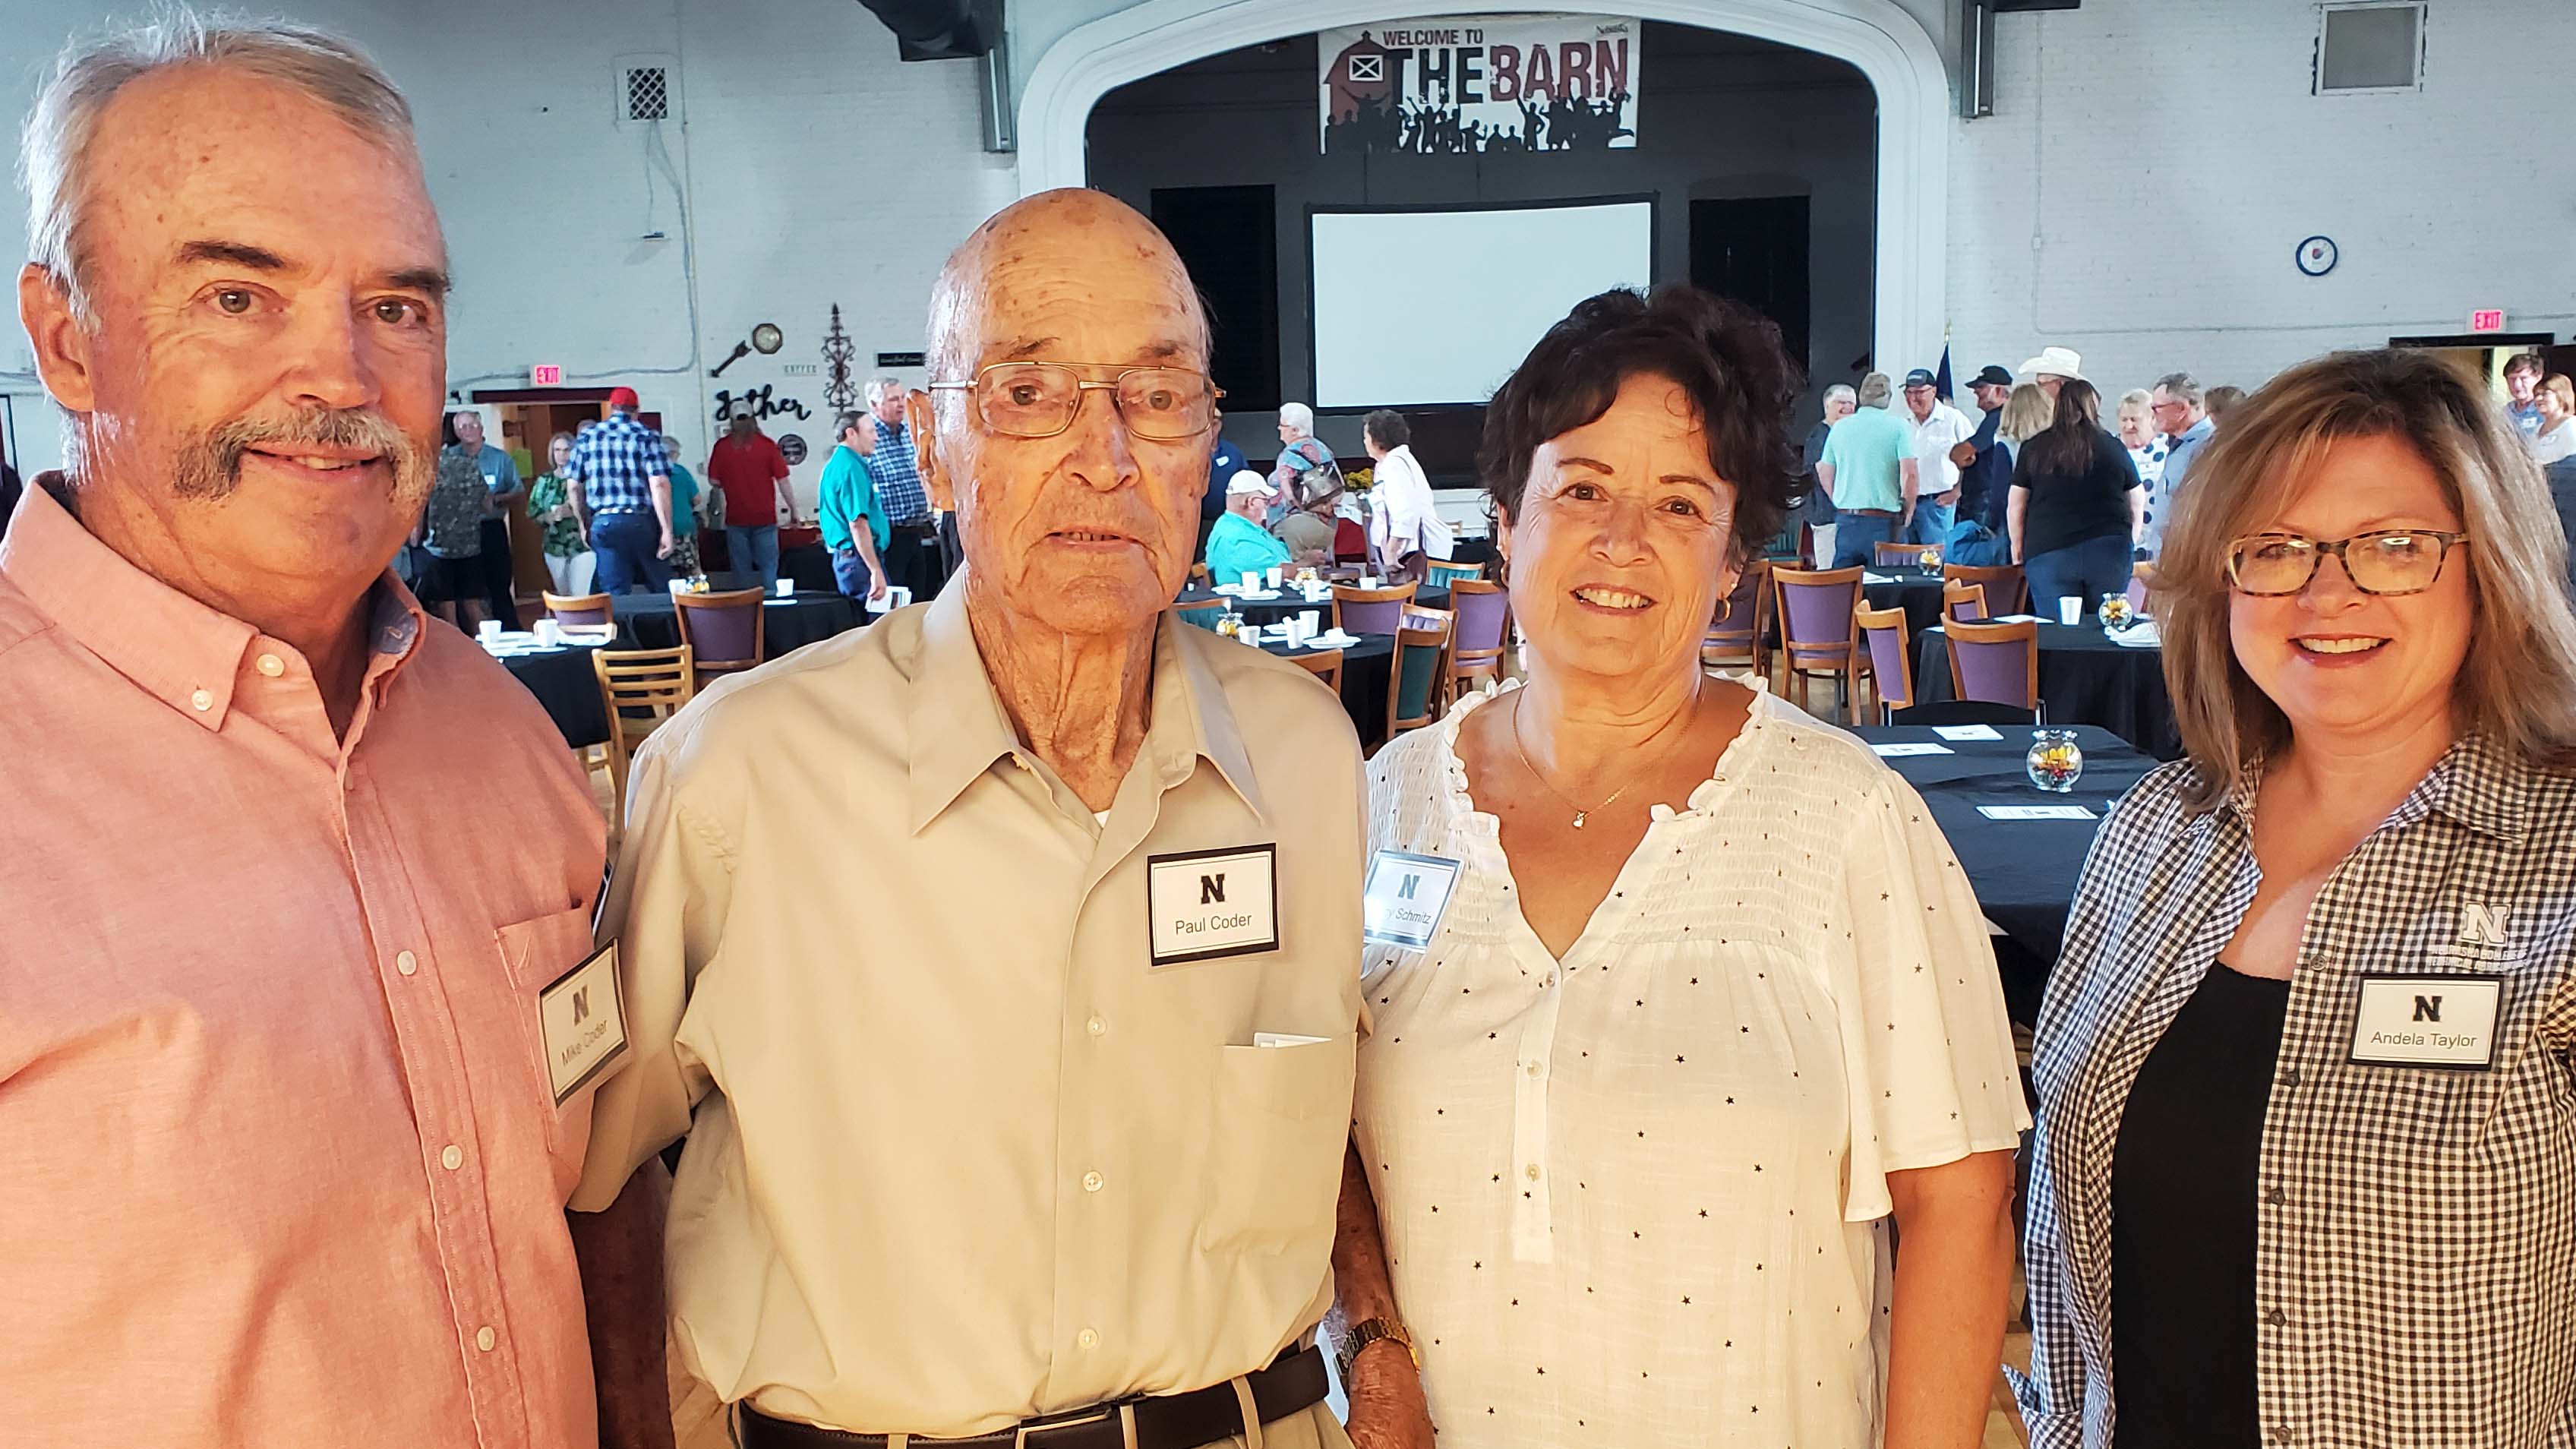 The "Curtis ag school" and beef cattle were among conversations at Aggie Alumni Day for Paul Coder, Class of '46, with his son Mike Coder, daughter Nancy Schmitz, and NCTA recruiting coordinator Andela Taylor. (M. Crawford photo / NCTA News)